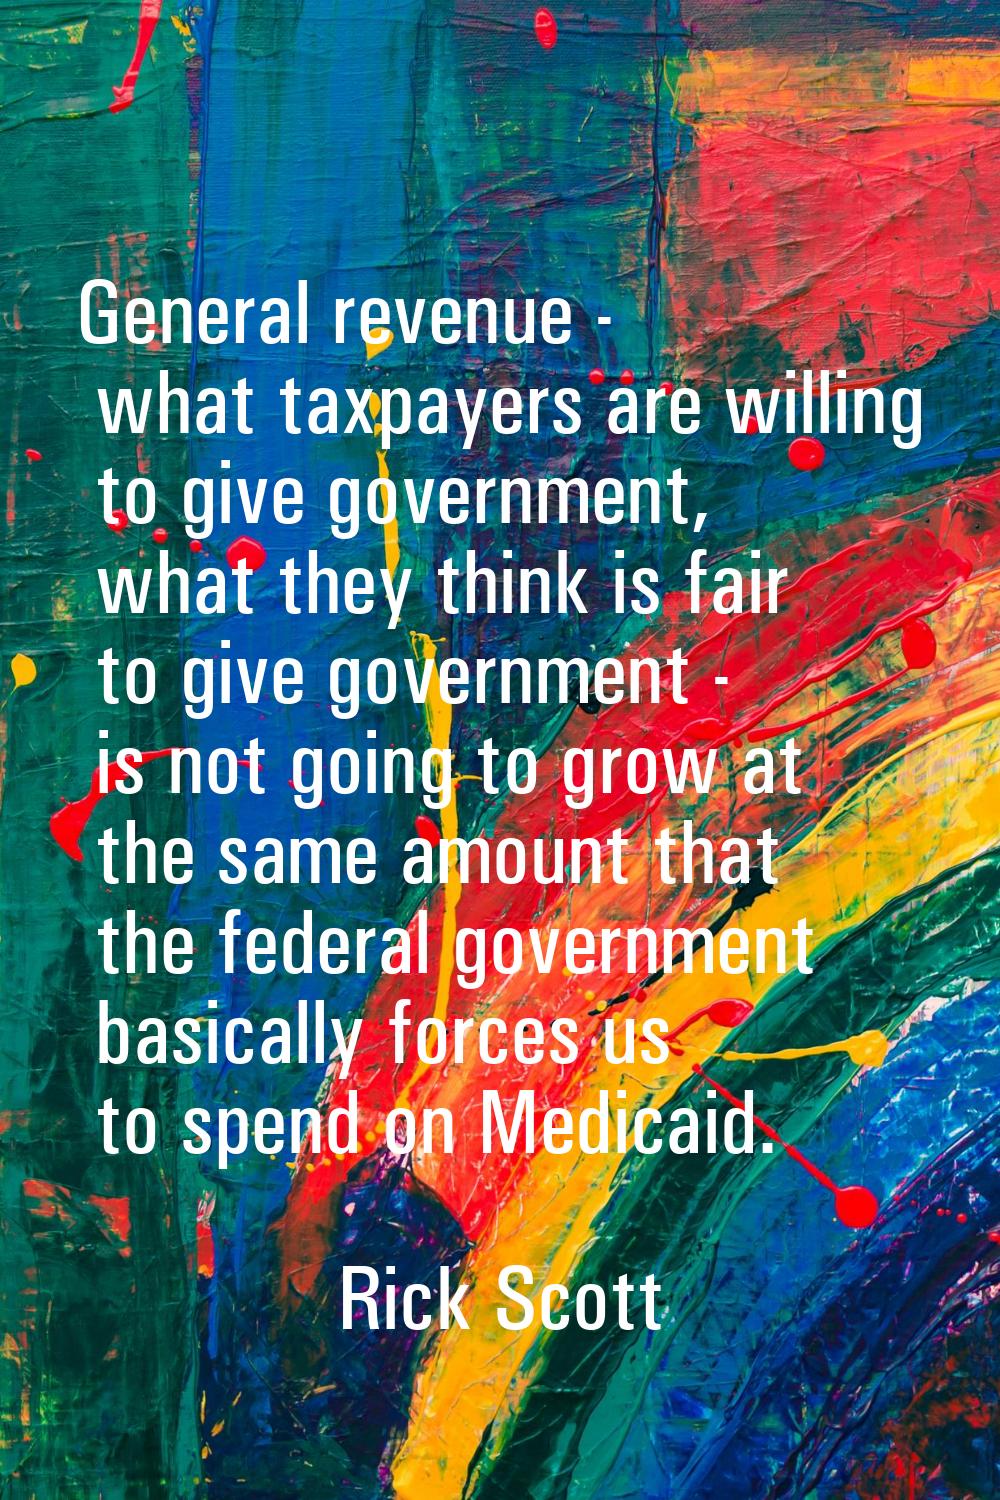 General revenue - what taxpayers are willing to give government, what they think is fair to give go